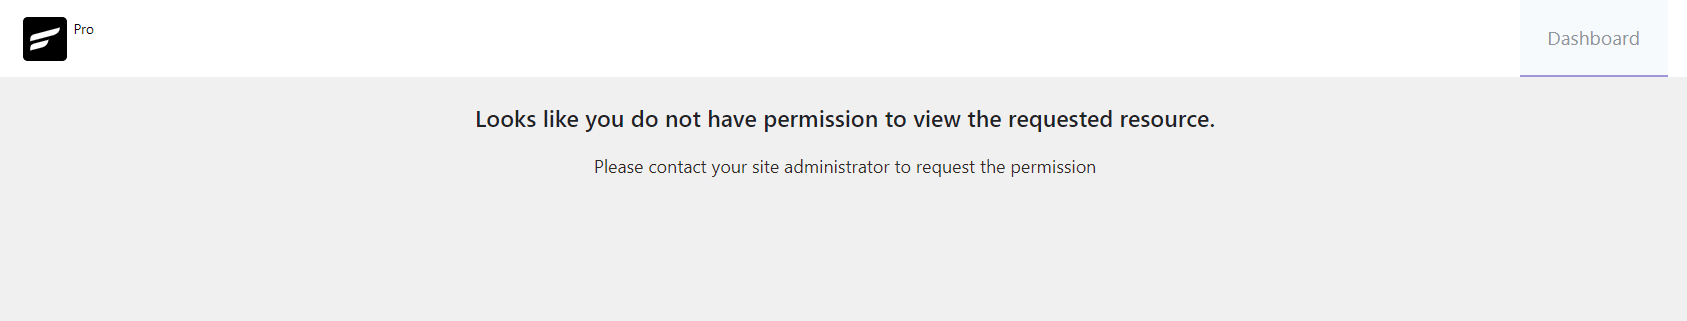 crm manager permission not granted